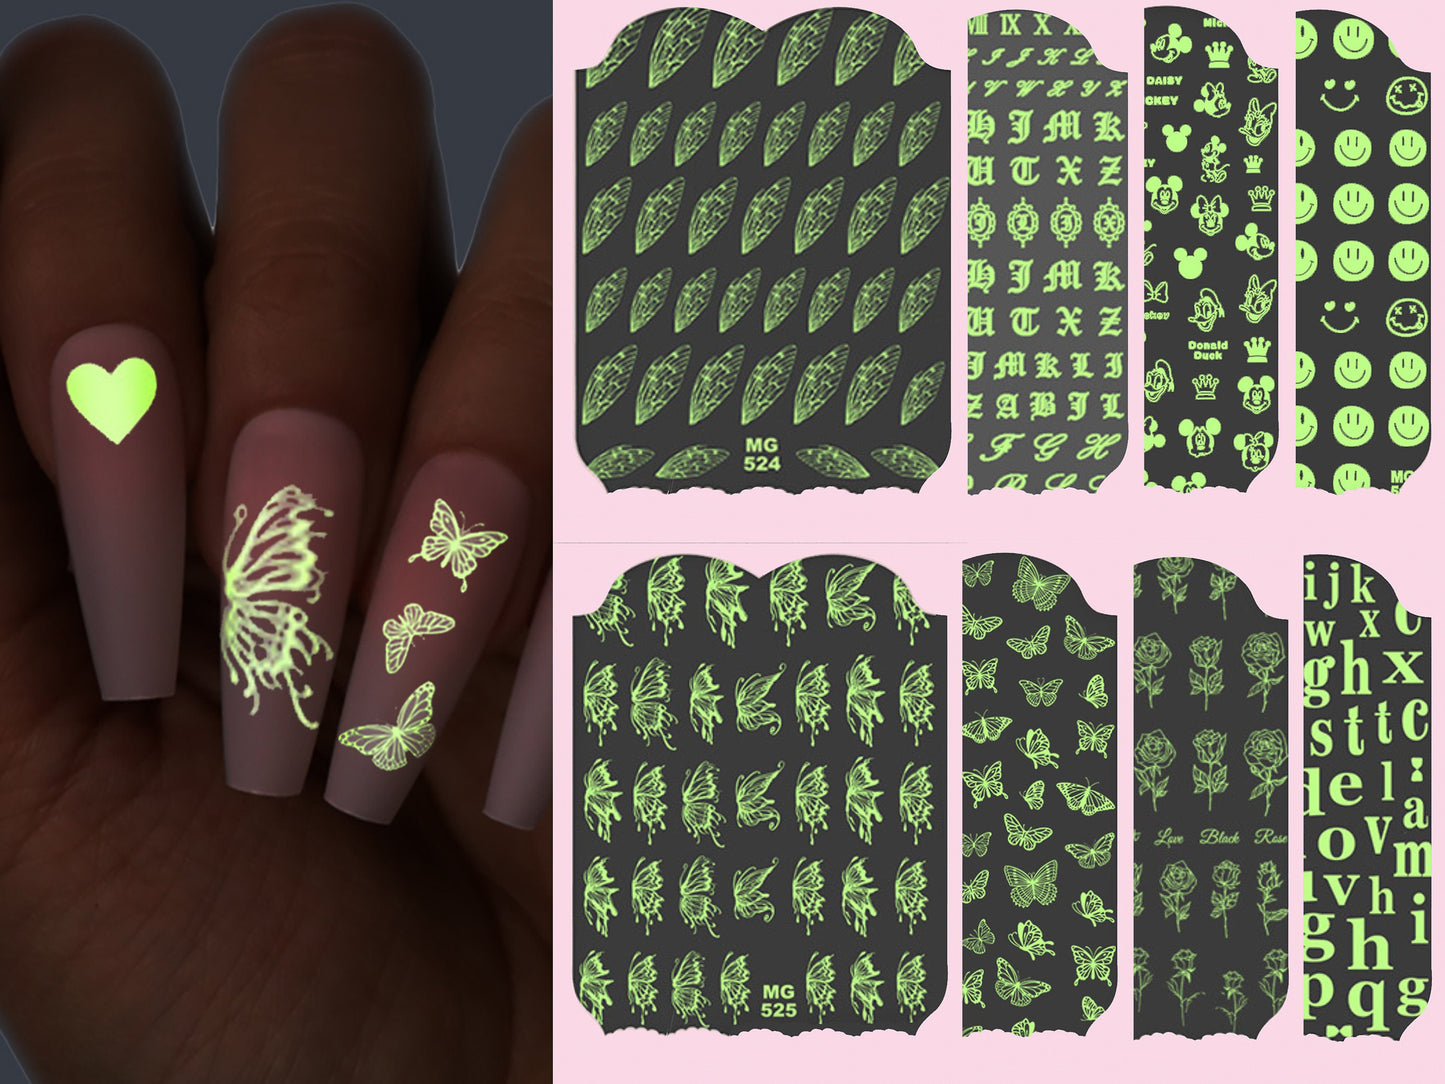 Fairy Tale Butterfly nail sticker/ Halloween Glow in the dark Night Life Party 3D Nail Art Self Adhesive Decals/ Peel off Floral Stickers